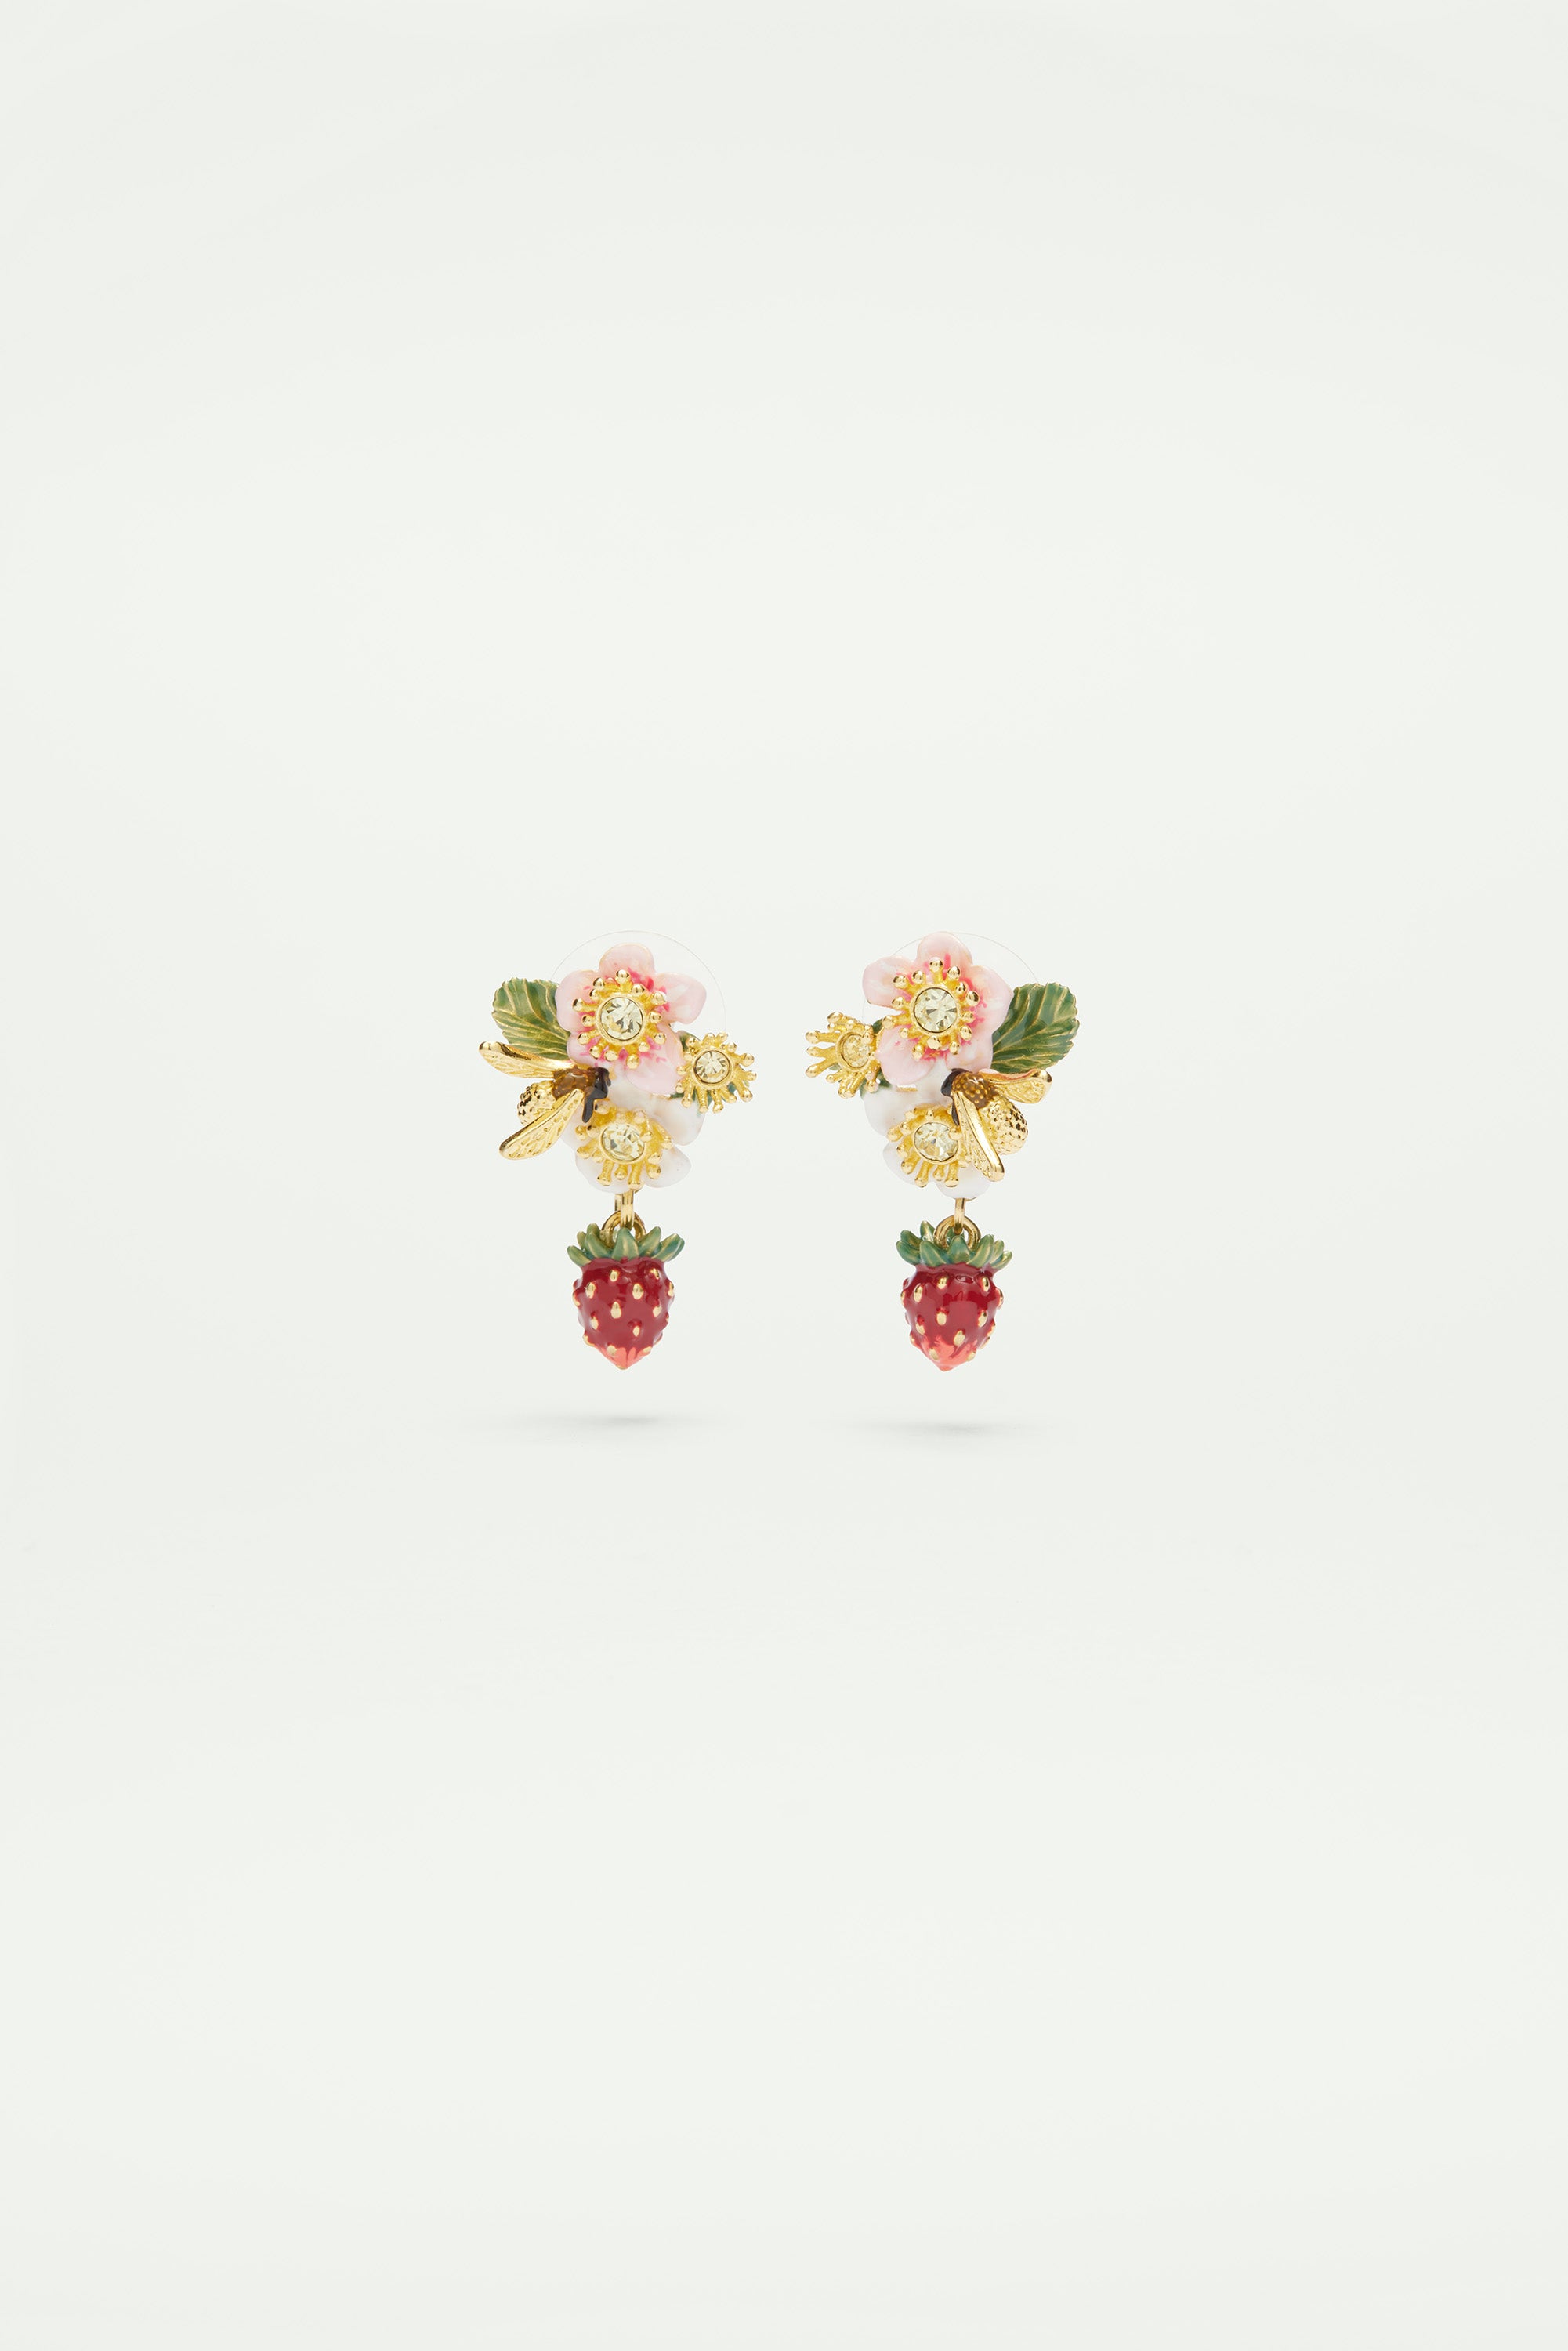 Wild strawberry and strawberry flower post earrings